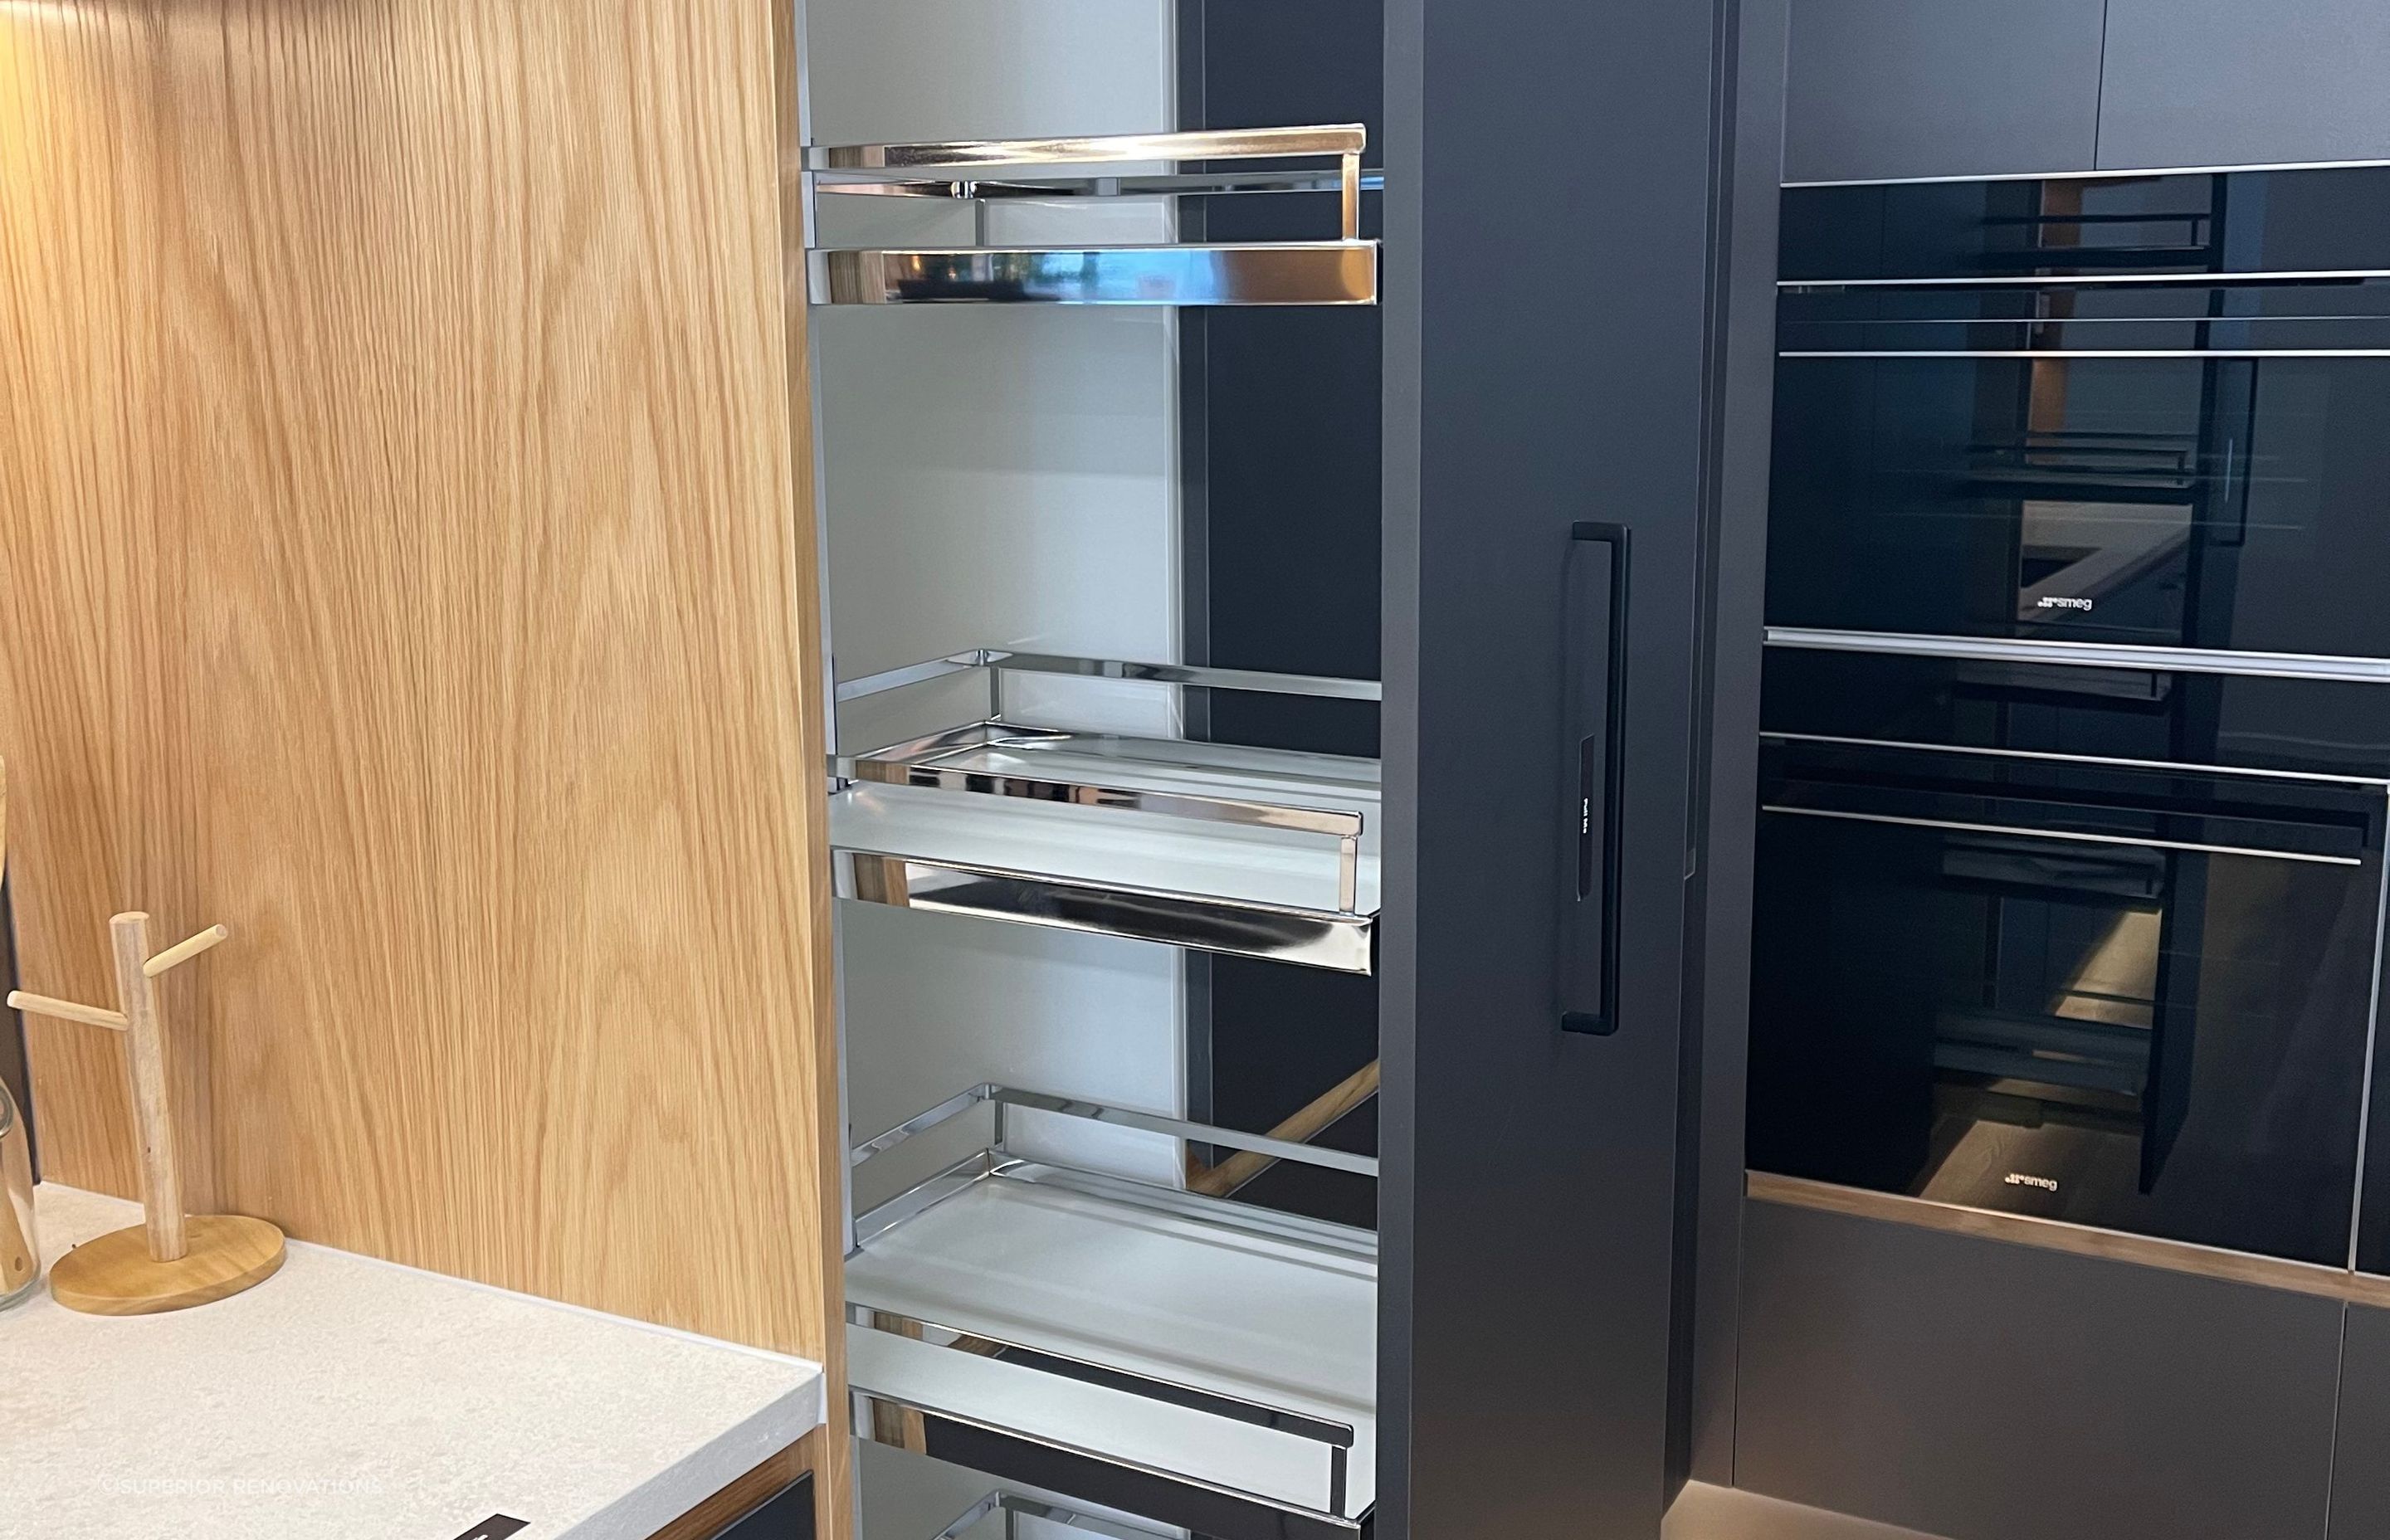 Pull out pantry with in-built shelves makes it easy for you to clearly see all the stored items and retrieve them. – This pantry can be seen in our matte black kitchen display in our Kitchen showroom in Auckland.